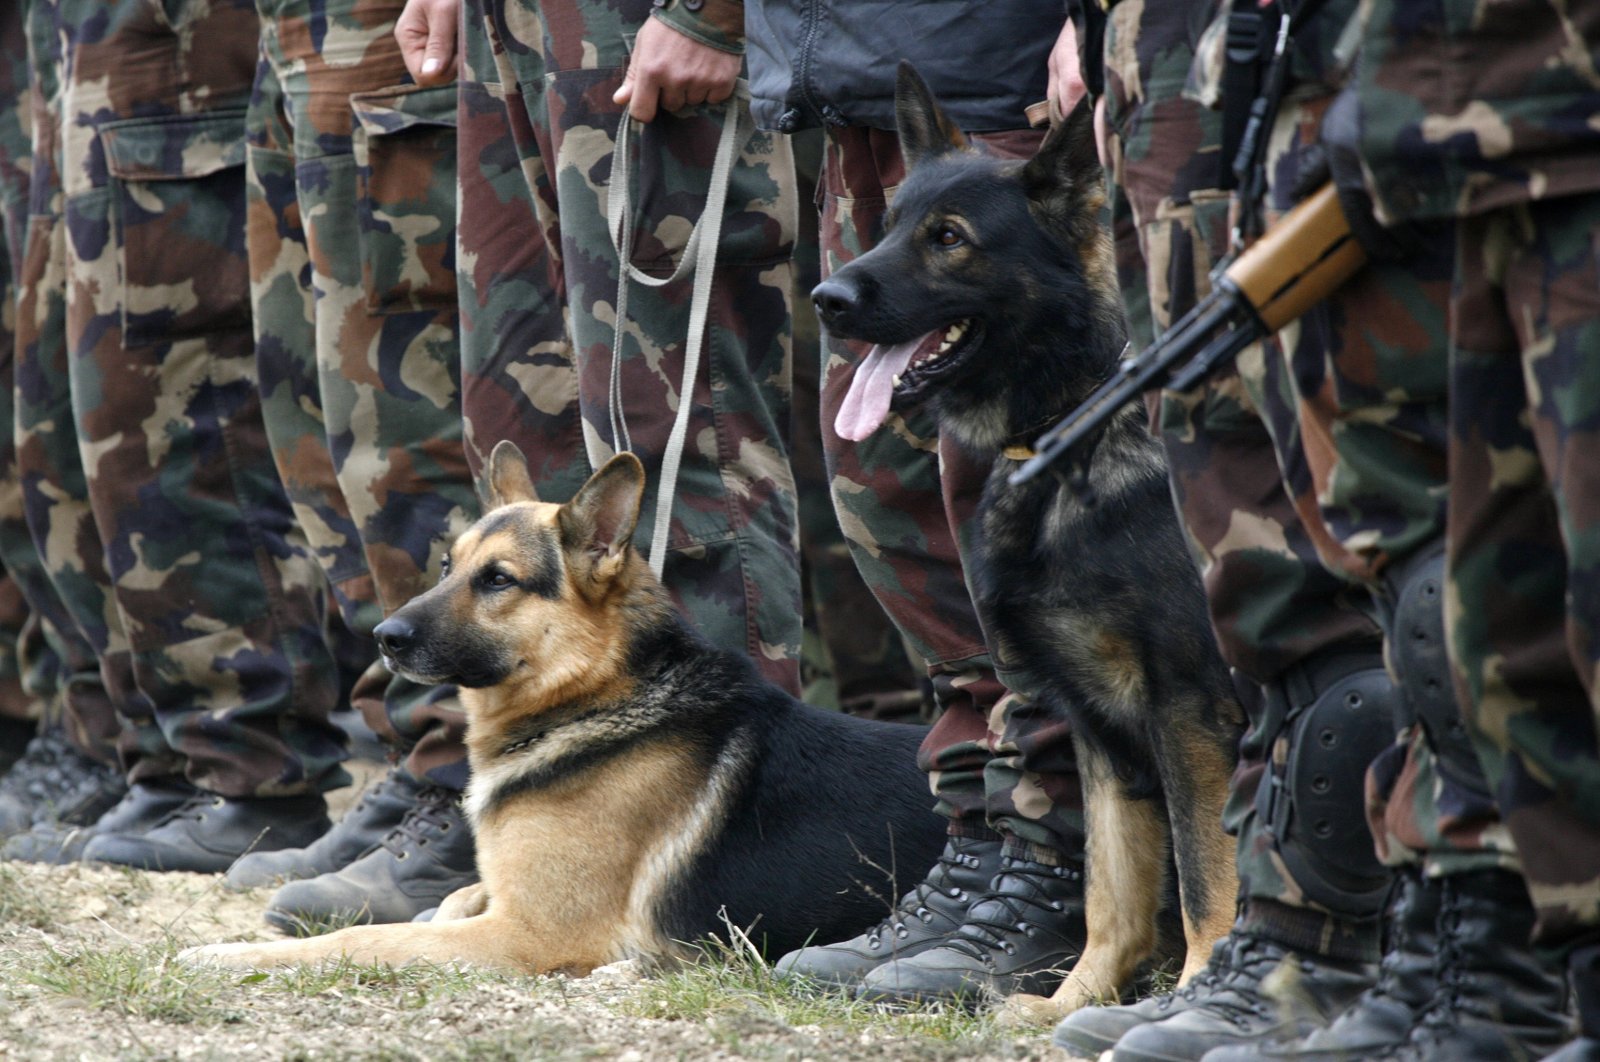 Soldiers with their dogs participate in a military exercise in Hajamasker, 120 km (75 miles) west of Budapest, Oct. 11, 2007. (Reuters File Photo)